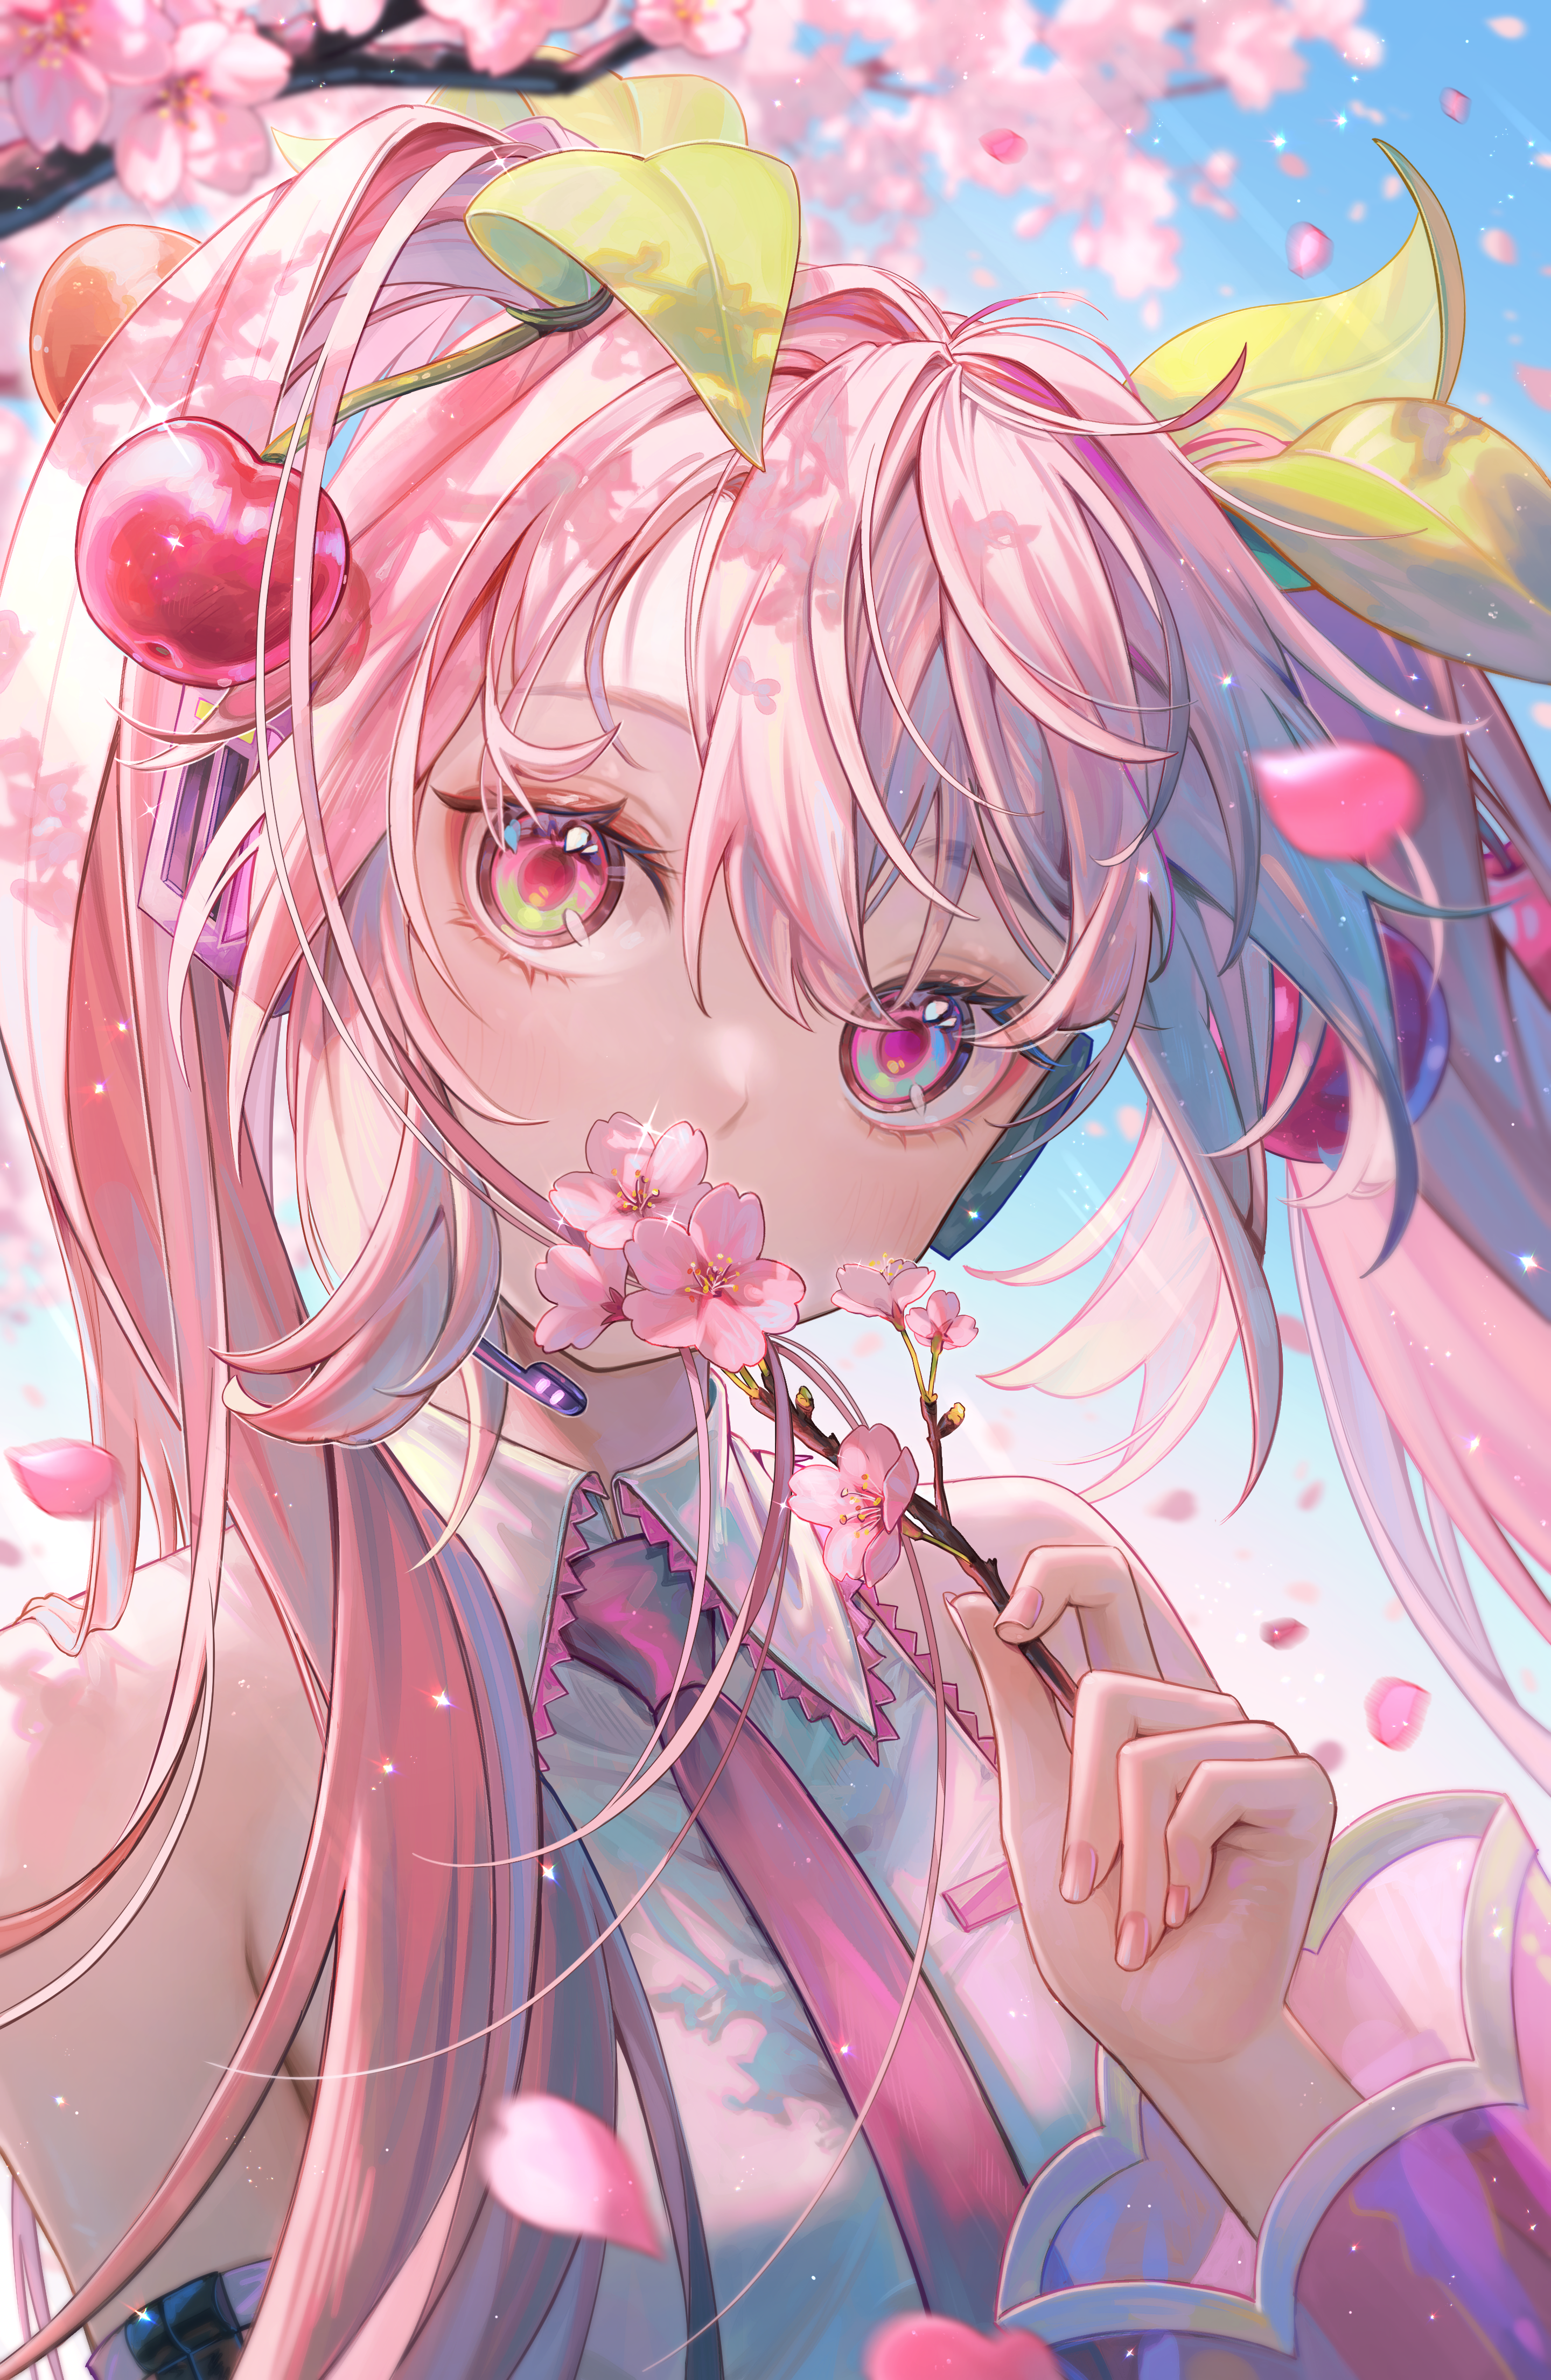 Anime 2880x4419 anime anime girls Pixiv portrait display Vocaloid Hatsune Miku Sakura Miku long hair twintails cherries cherry blossom sunlight flowers petals wind hair blowing in the wind bare shoulders pink hair multi-colored eyes stars covering mouth tie branch looking at viewer fruit